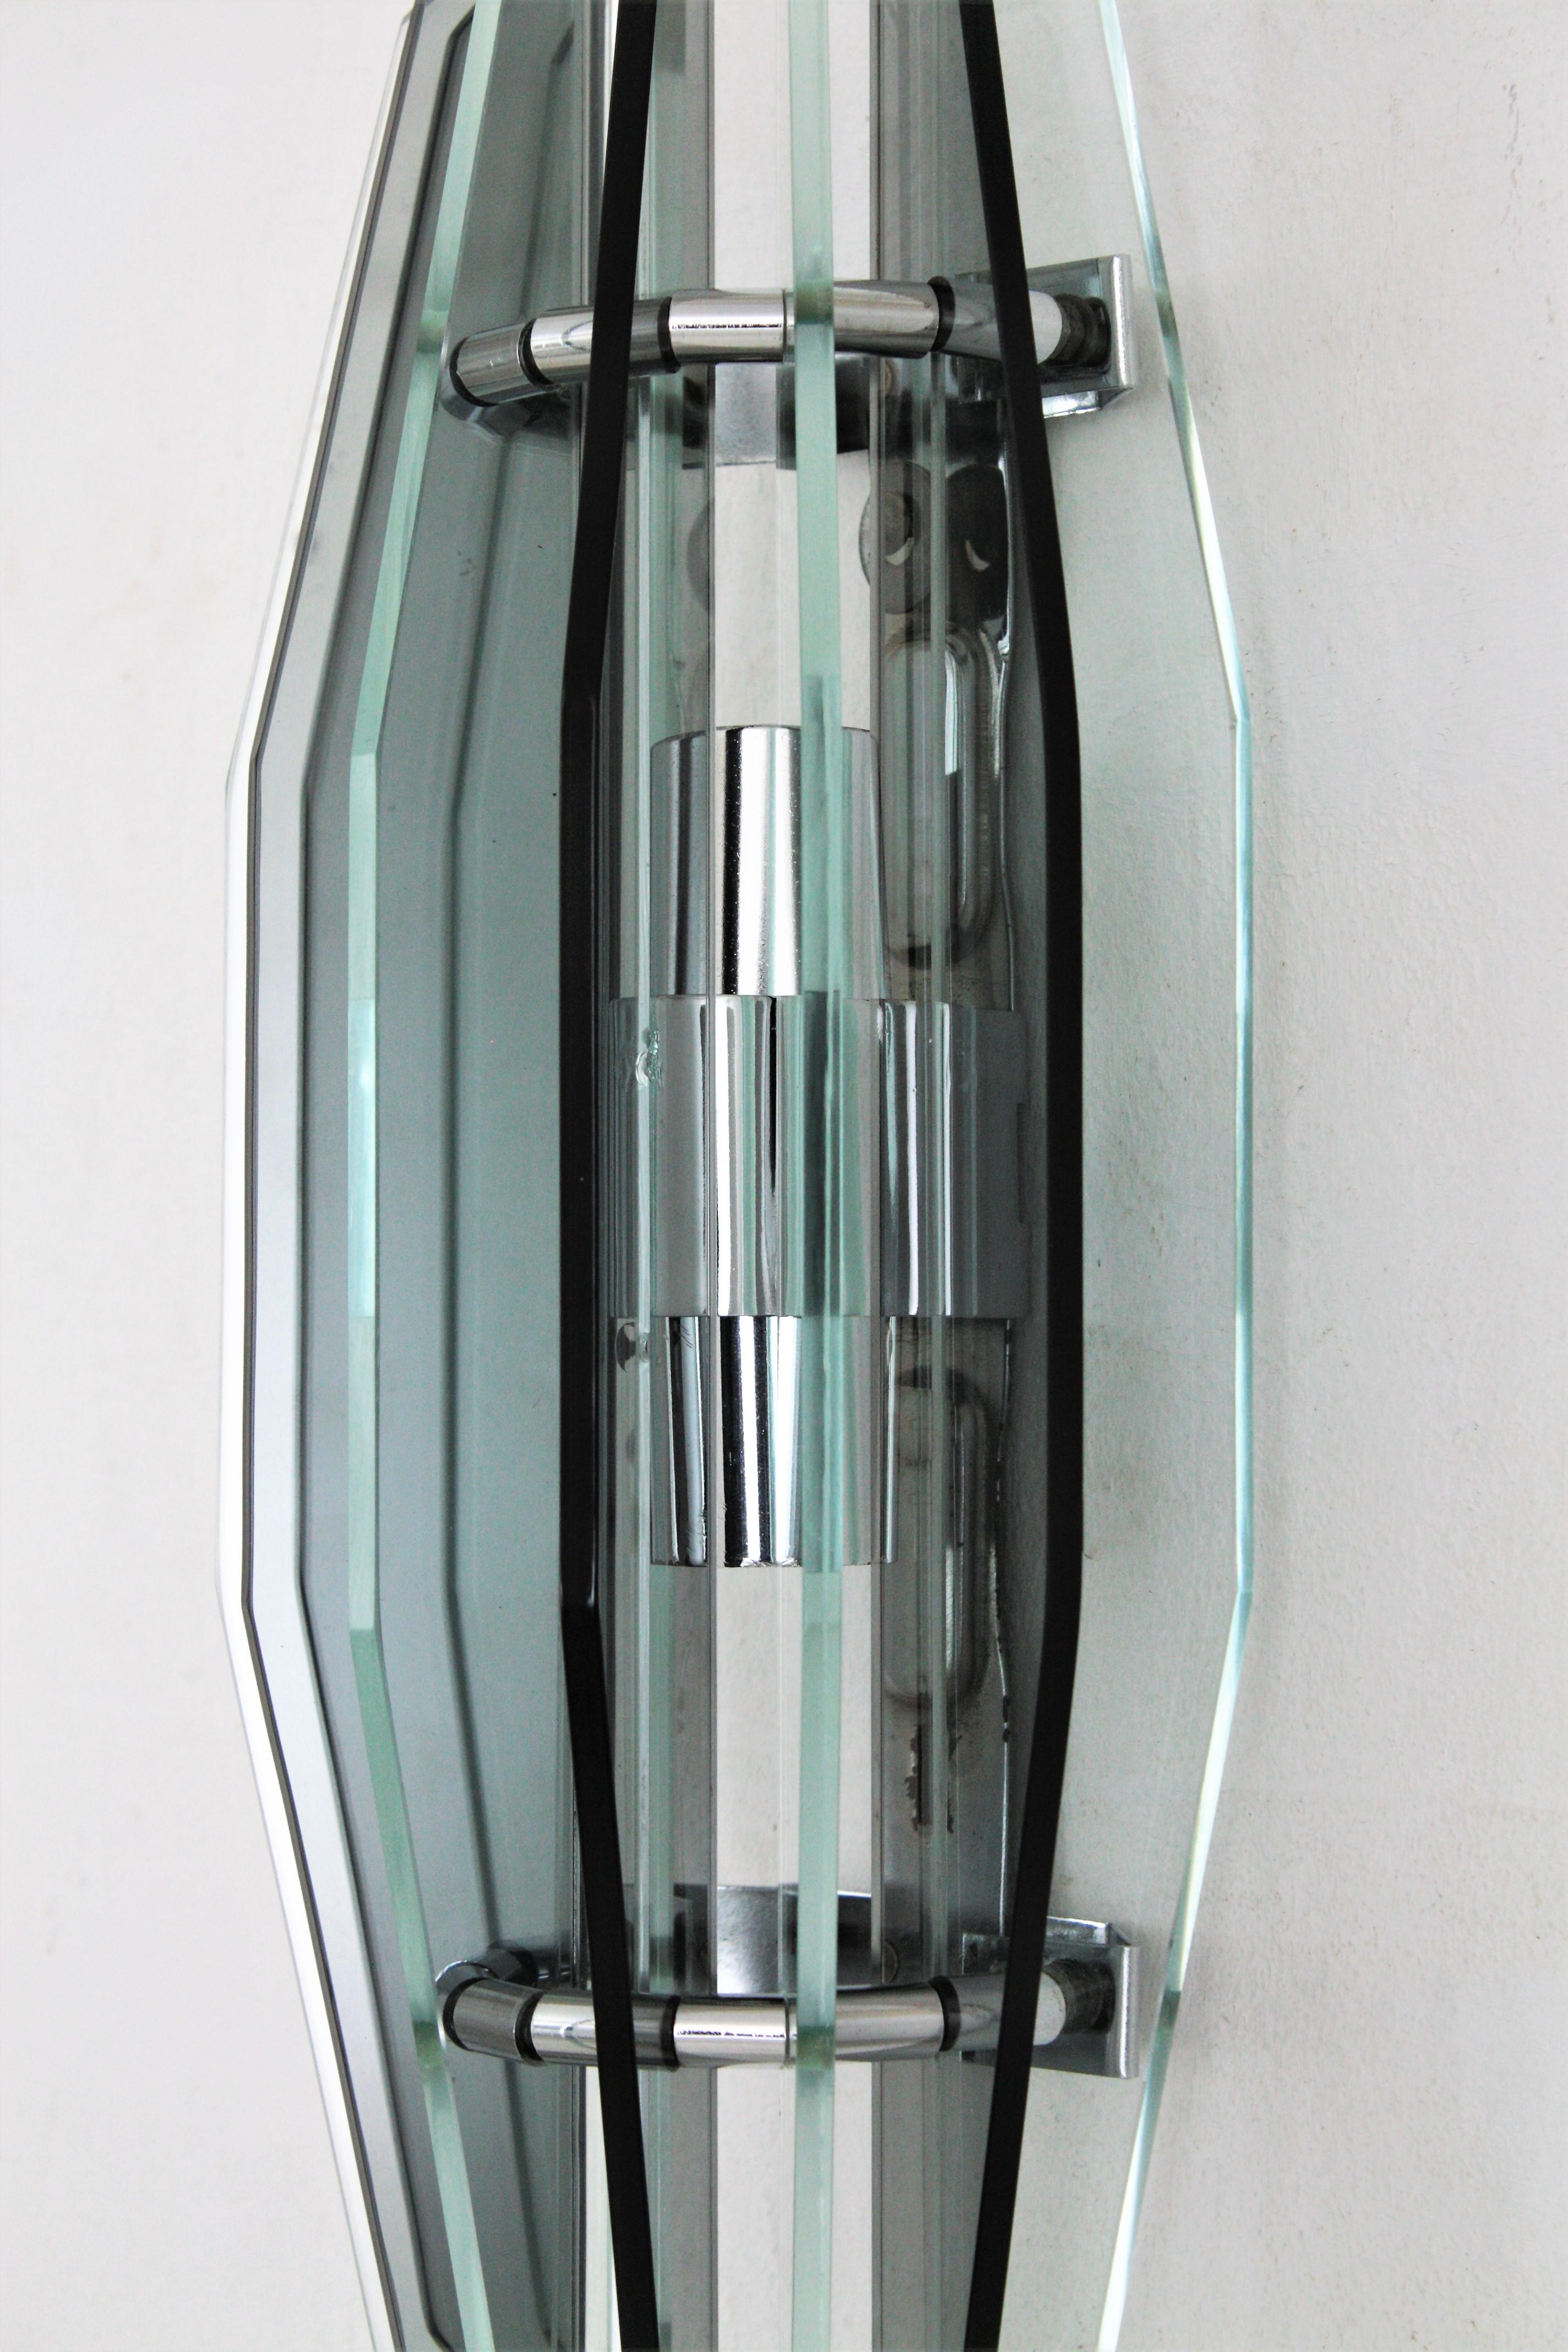 Midcentury Italian Glass Wall Sconce in the Manner of Fontana Arte For Sale 4